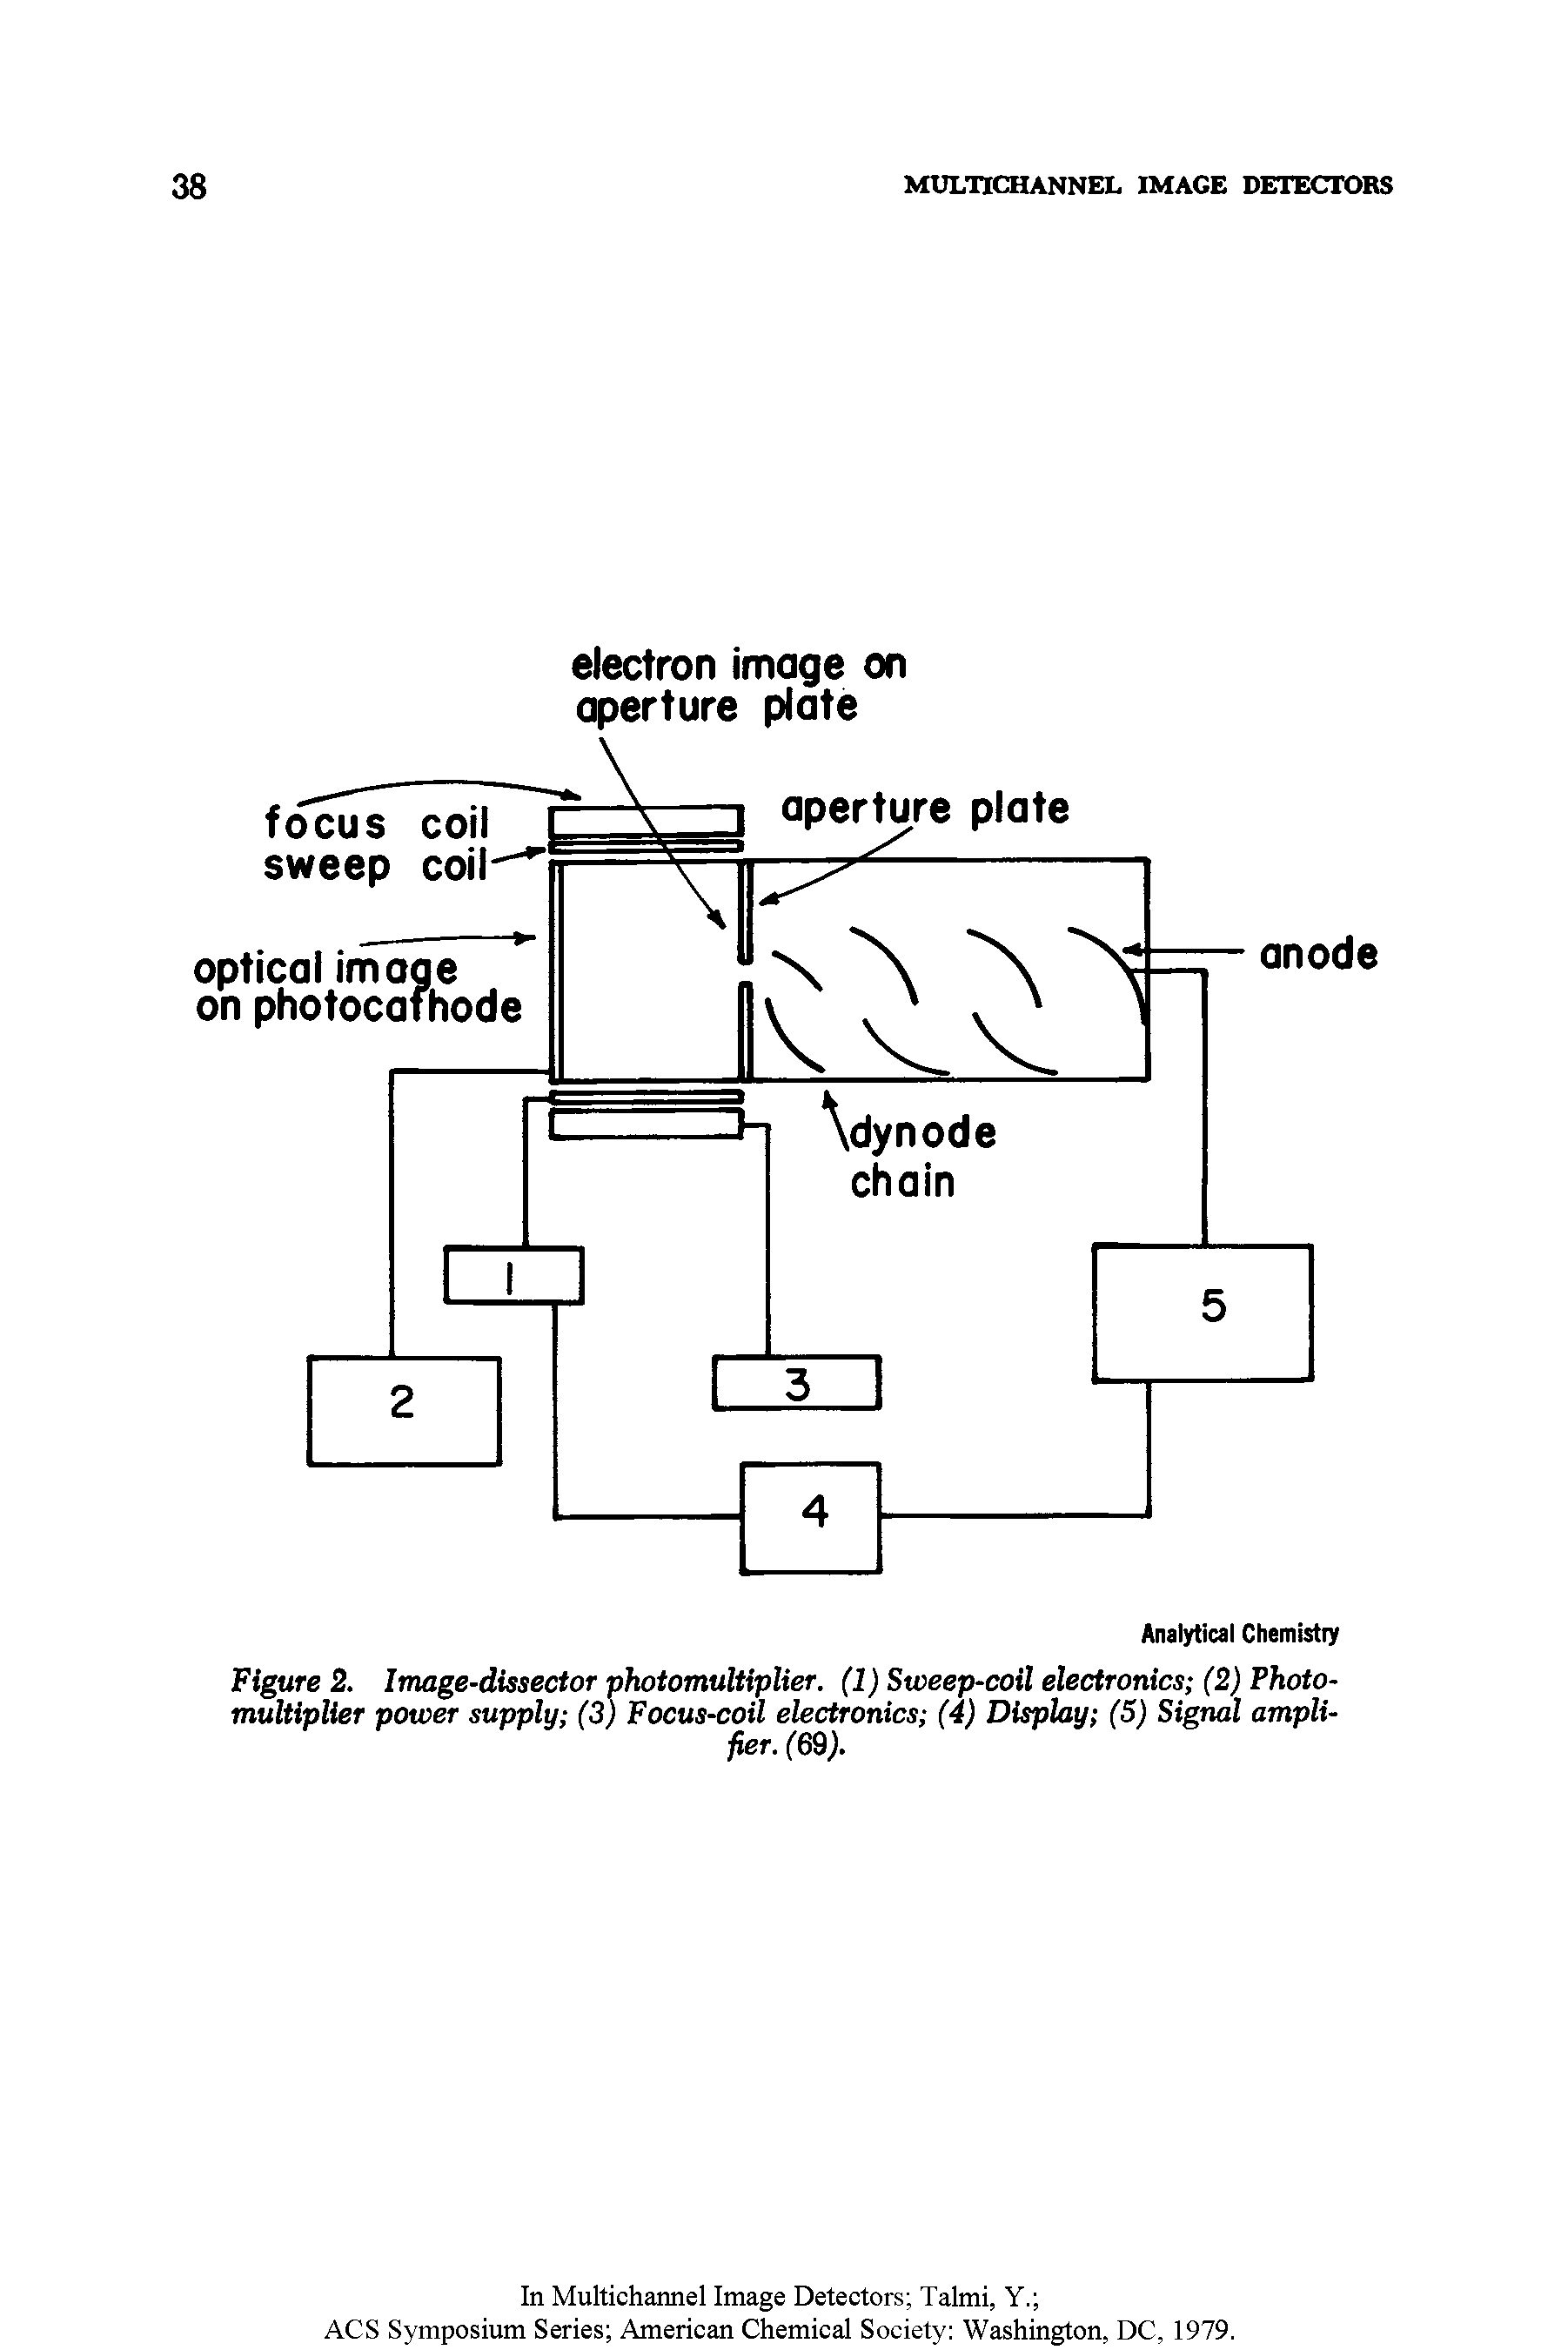 Figure 2. Image-dissector photomultiplier. (1) Sweep-coil electronics (2) Photomultiplier power supply (3) Focus-coil electronics (4) Display (5) Signal amplifier. (69).